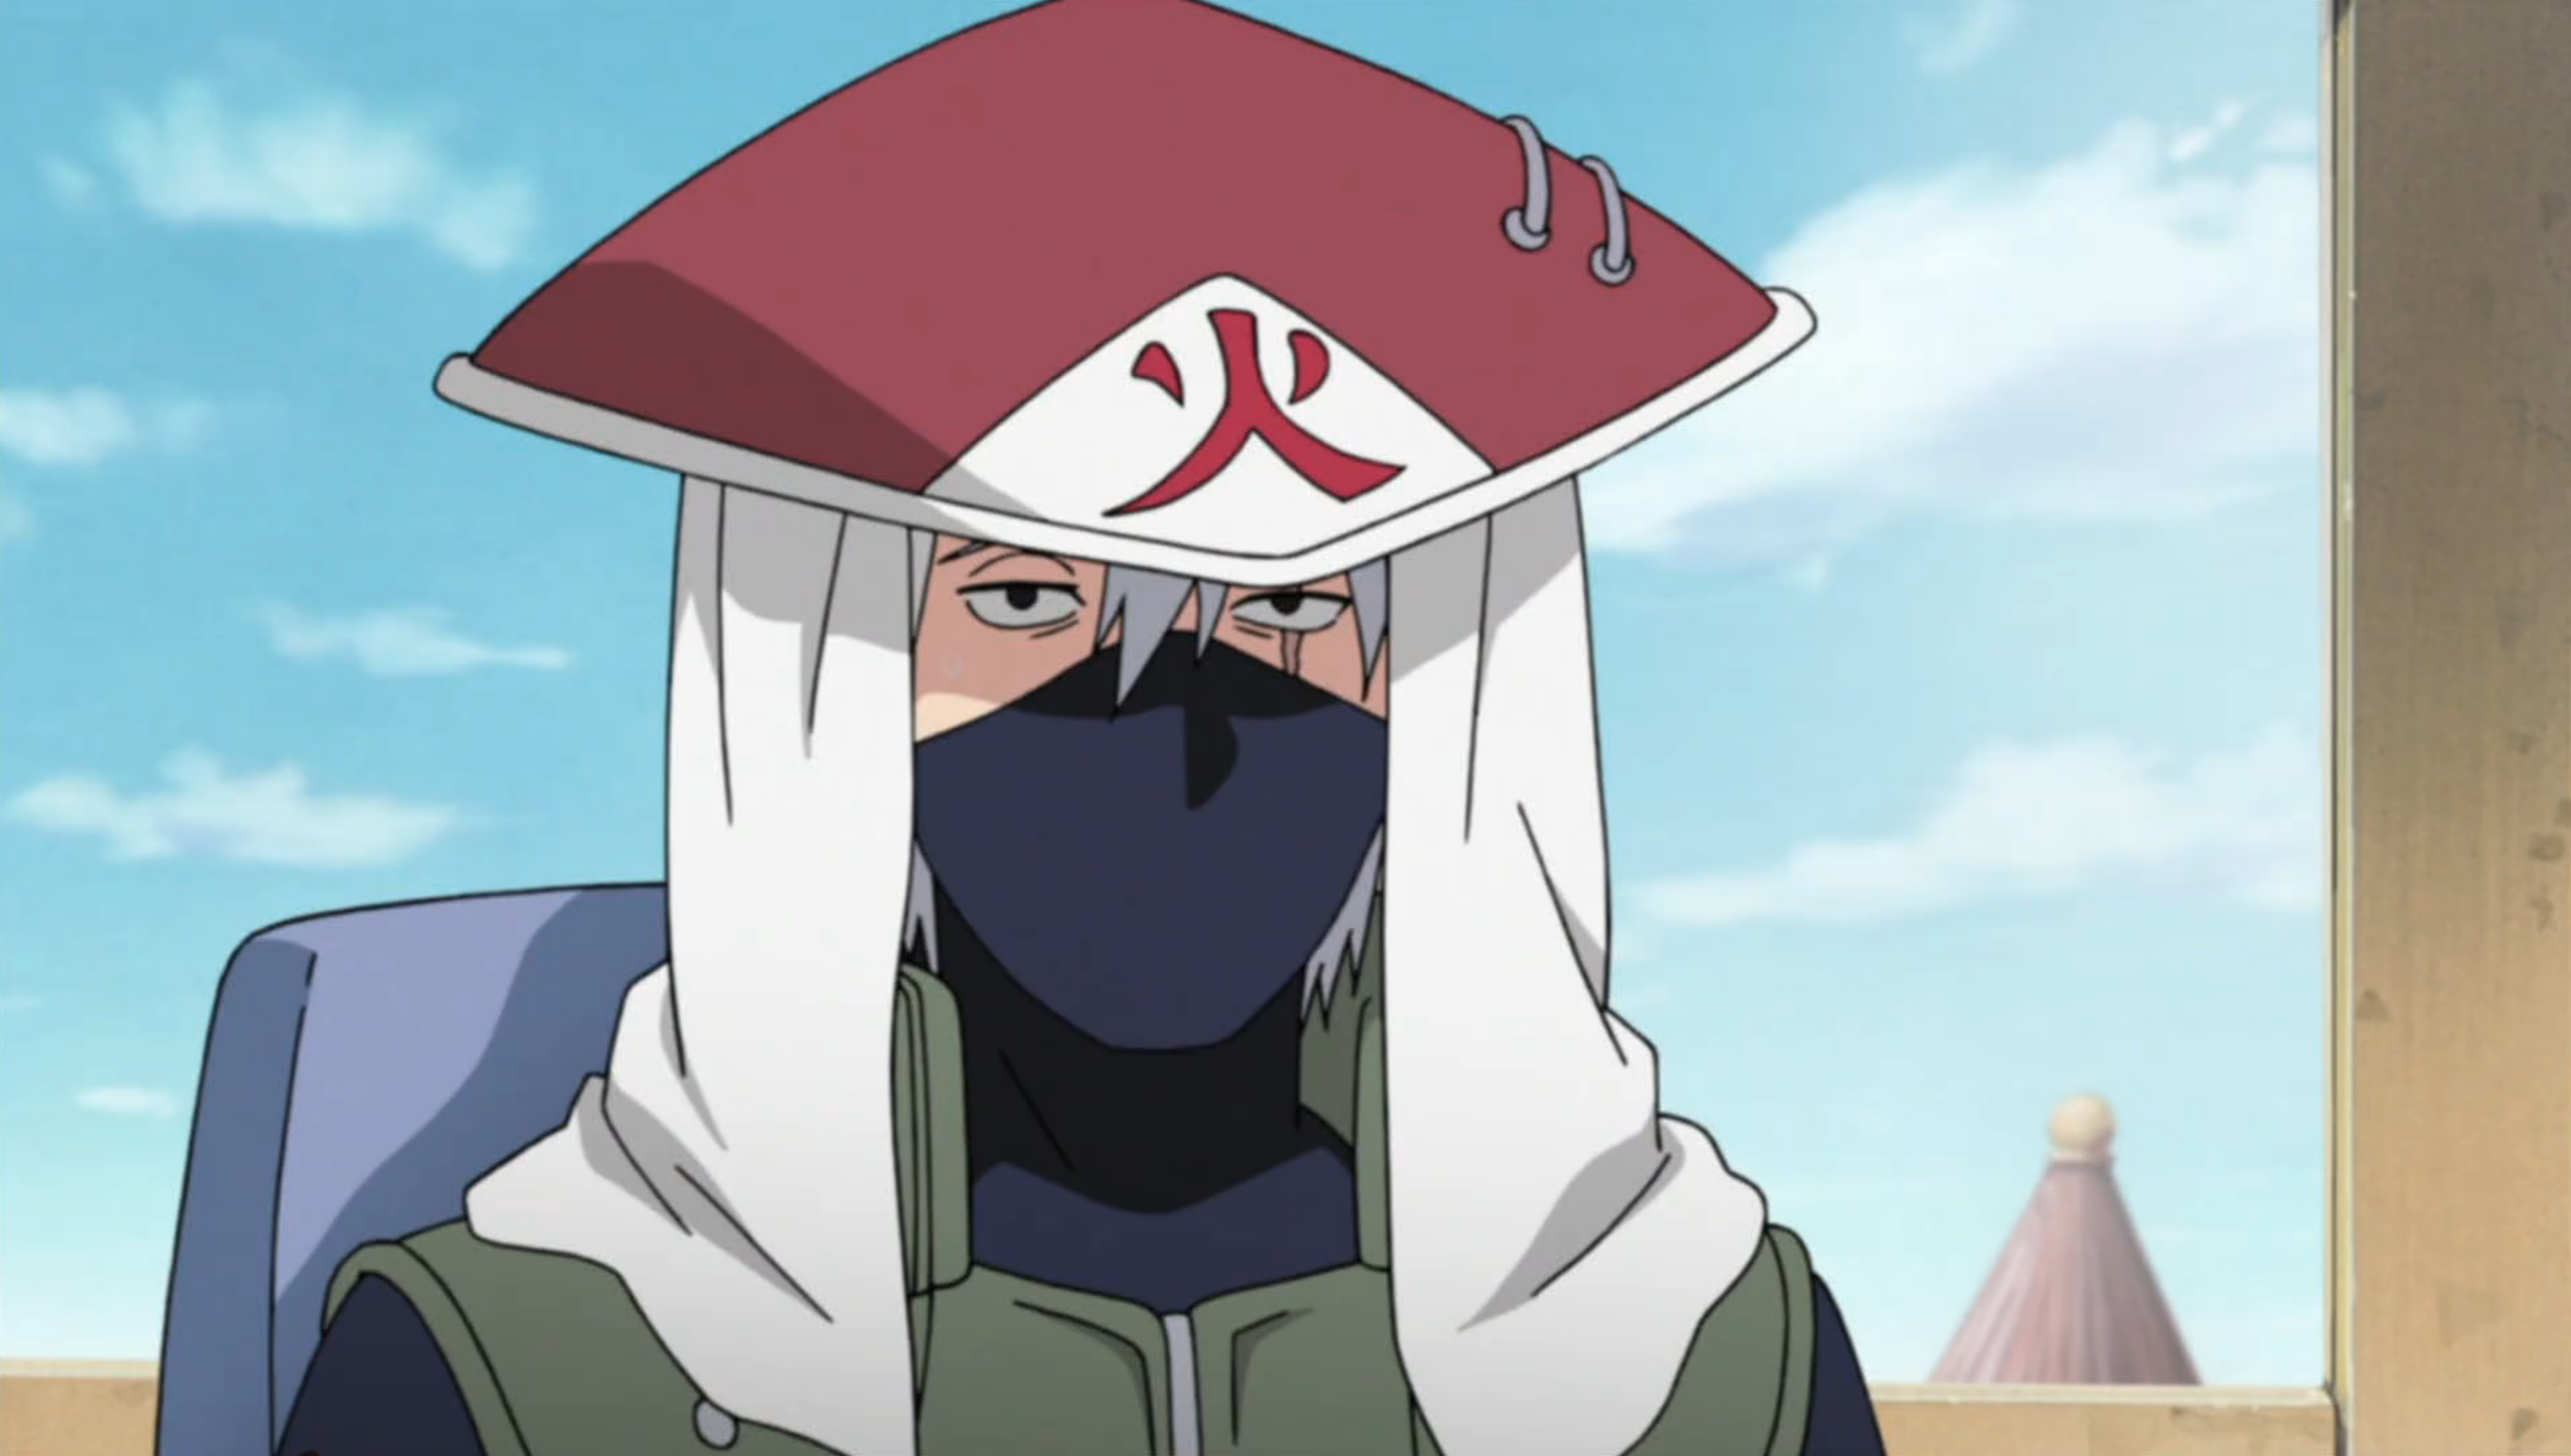 What's the deal with almost every hokages personal student going